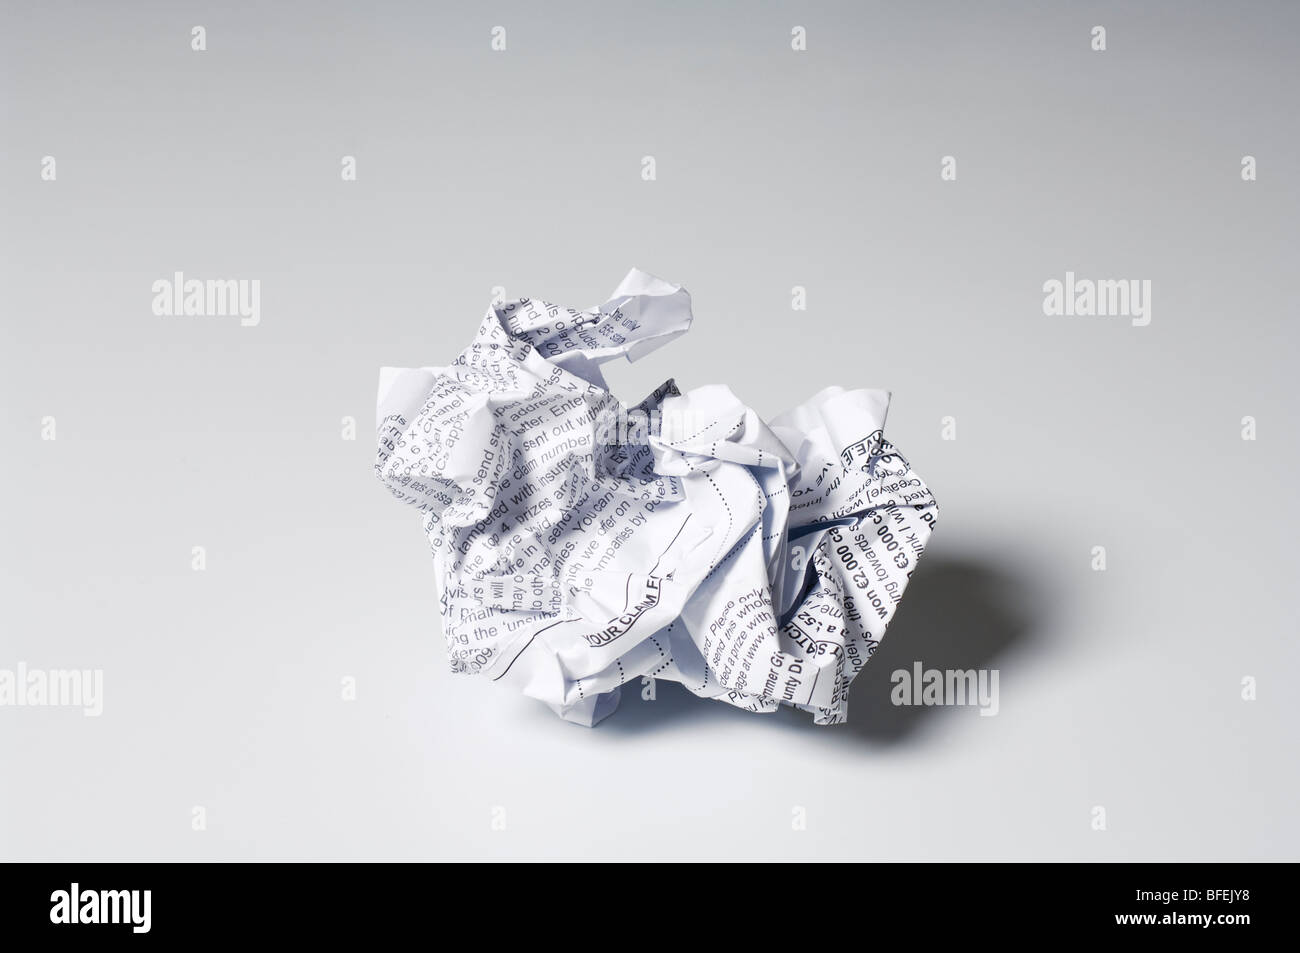 A crumpled up document Stock Photo